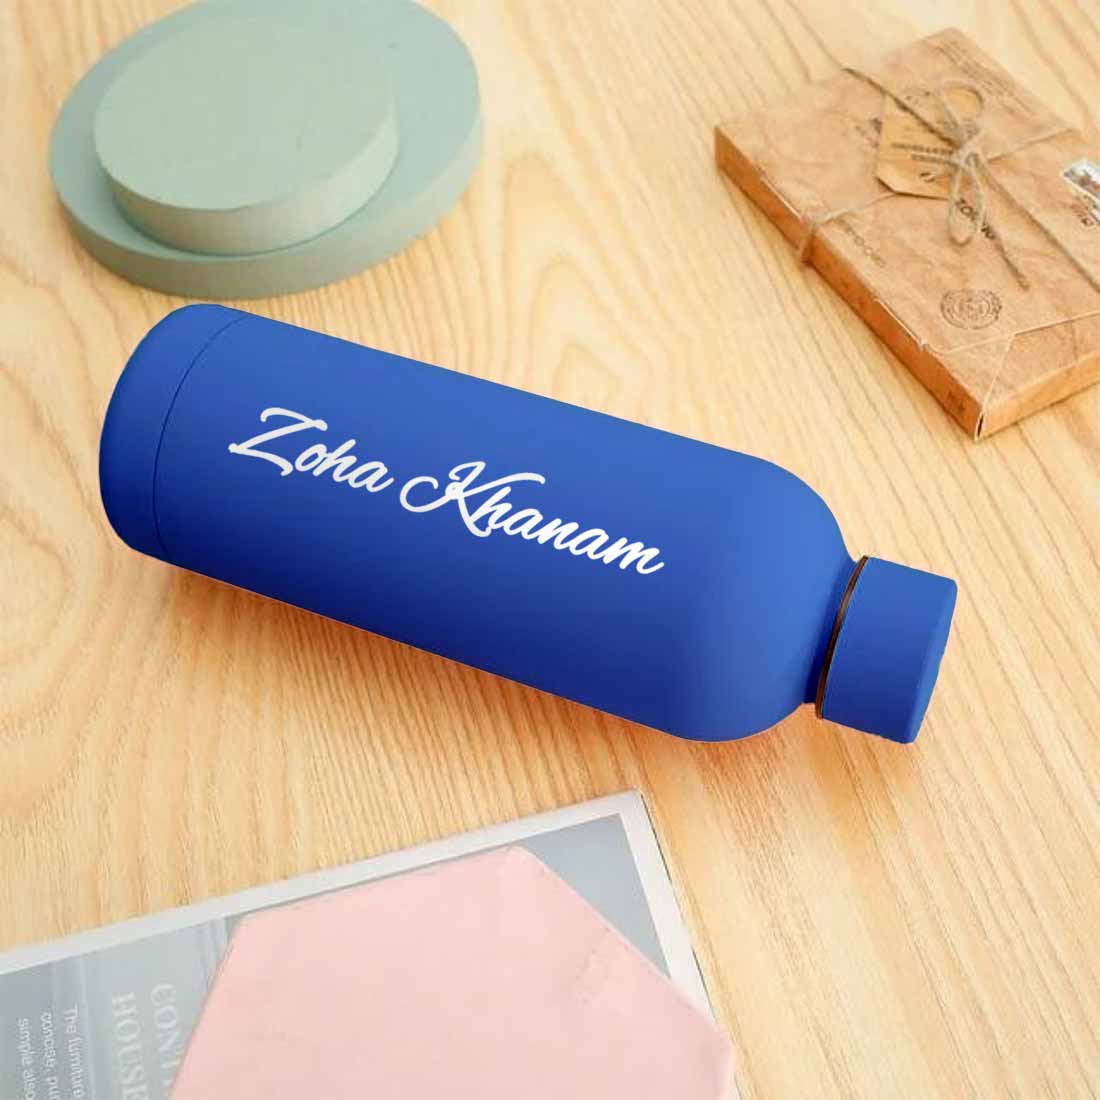 Stainless Steel Water Bottle with Names 500ml Double Insulated Bottles for Office Home Travel- BPA Free, Leakproof- Set OF 2